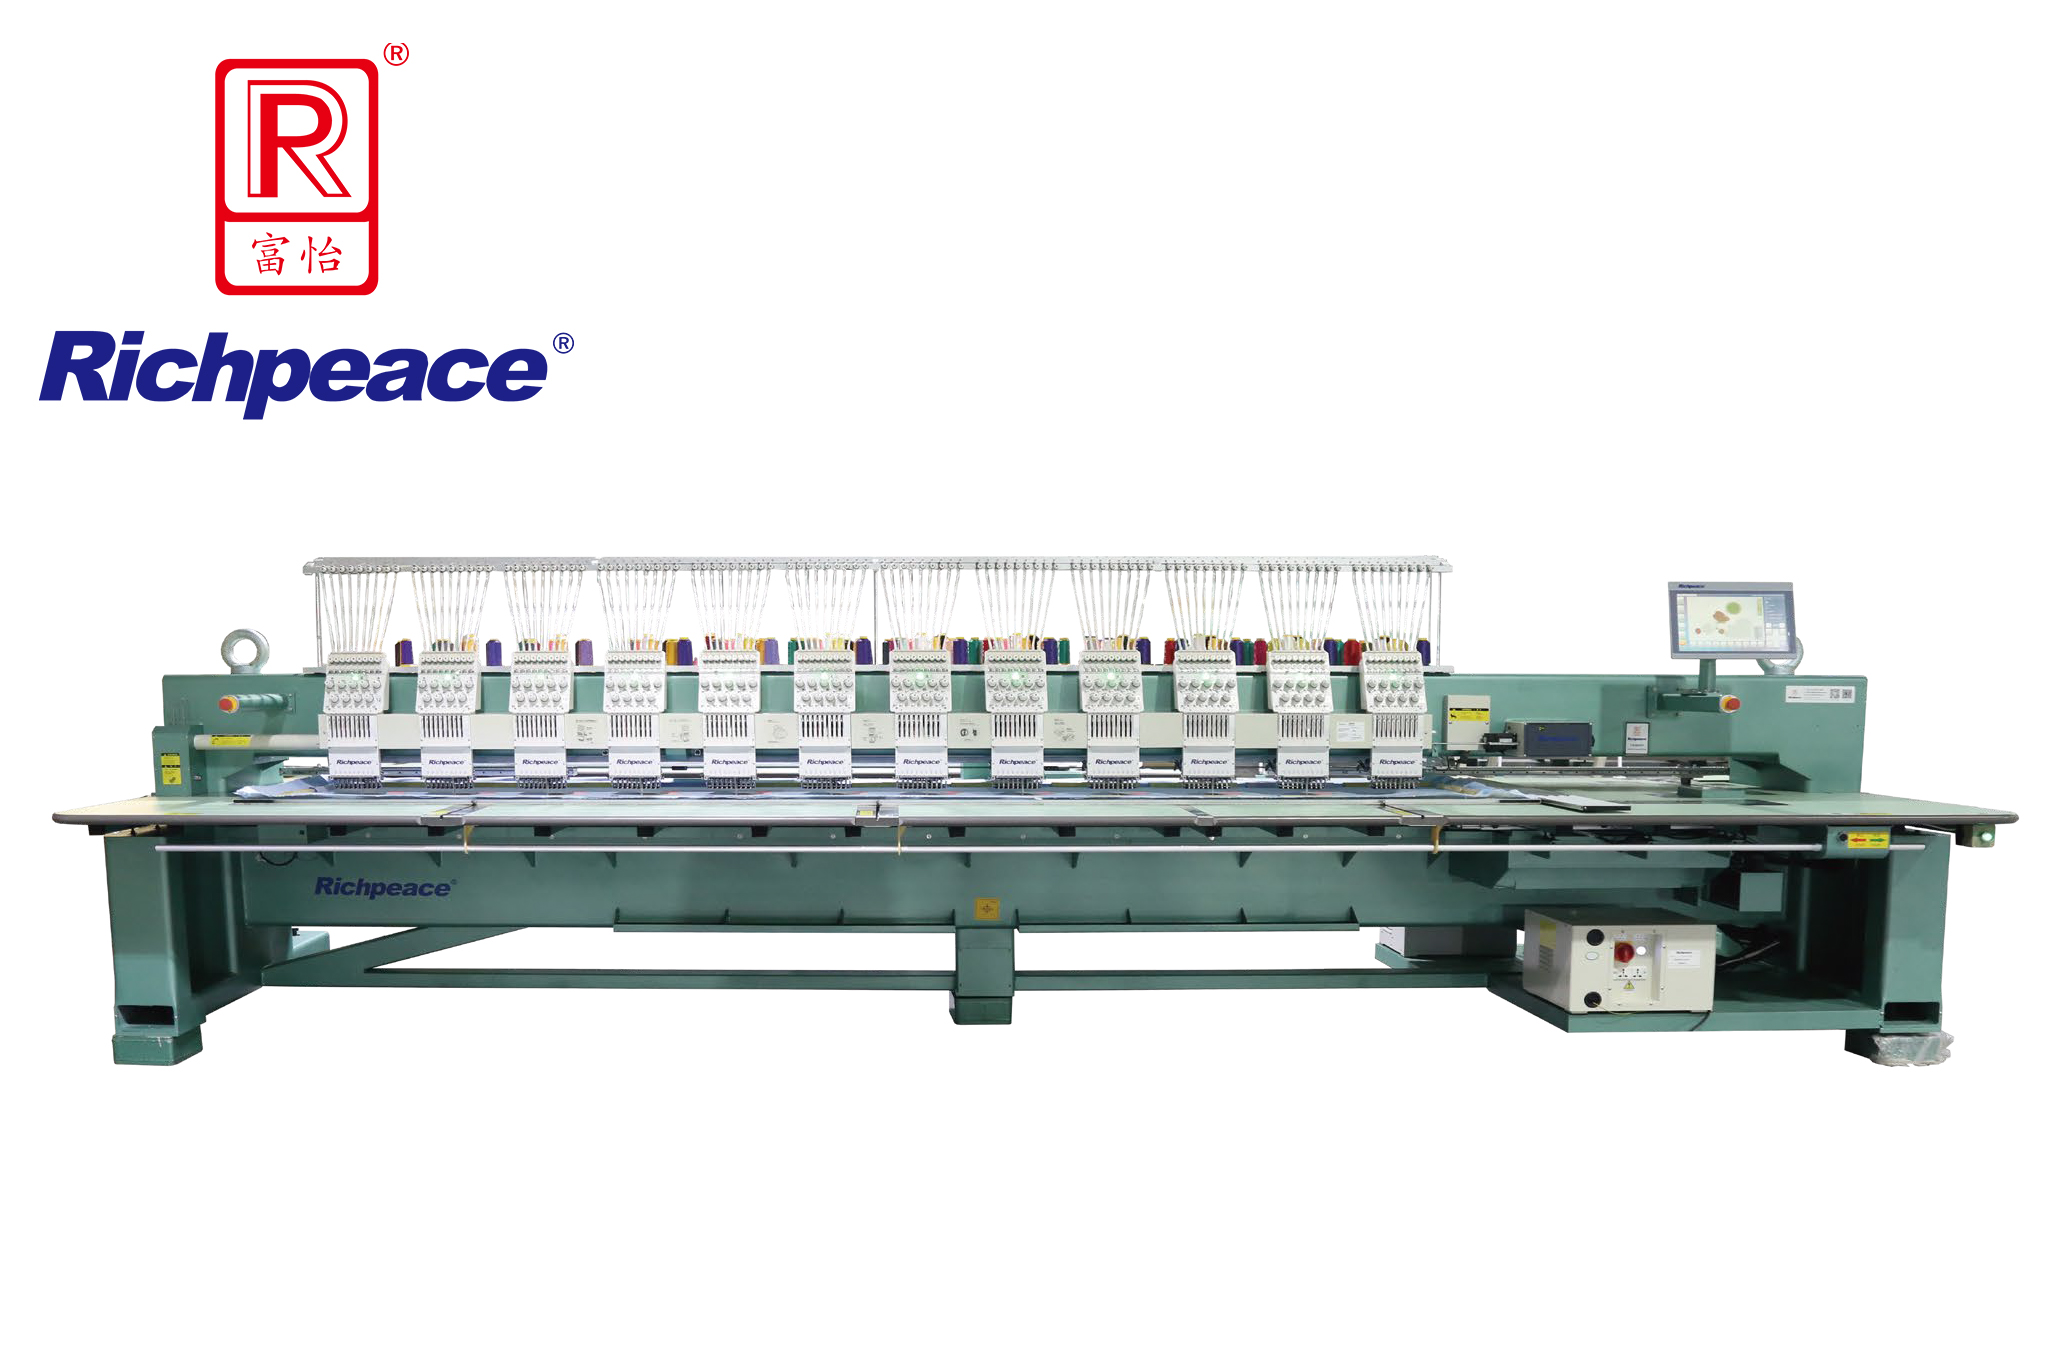 12 Heads Embroidery Machine(Optional 4 colors / 6 colors / 9 colors / 12 colors / 15 colors, according to machine heads distance)